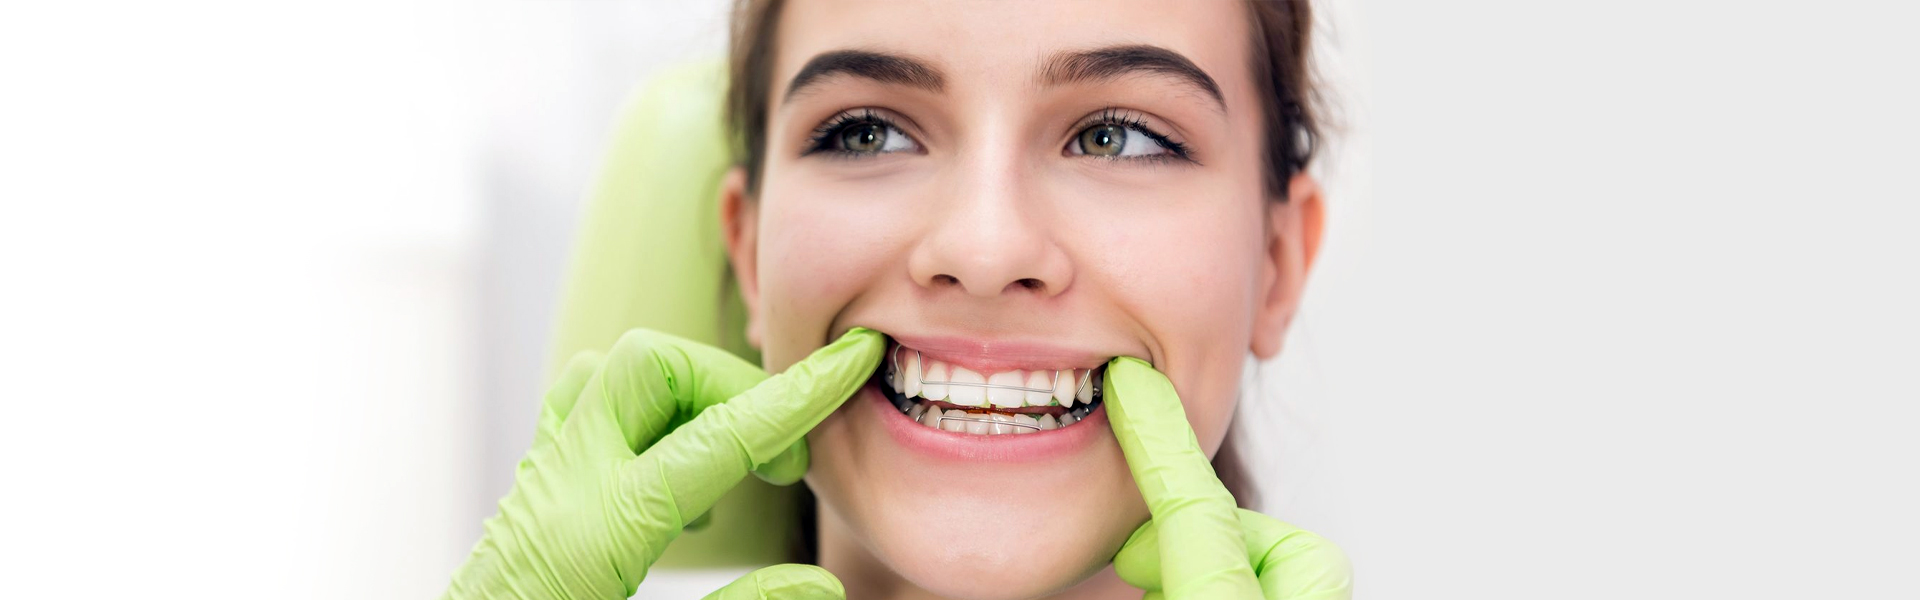 Invisalign An Orthodontic Treatment Offering Comfort and Relief When Straightening Teeth